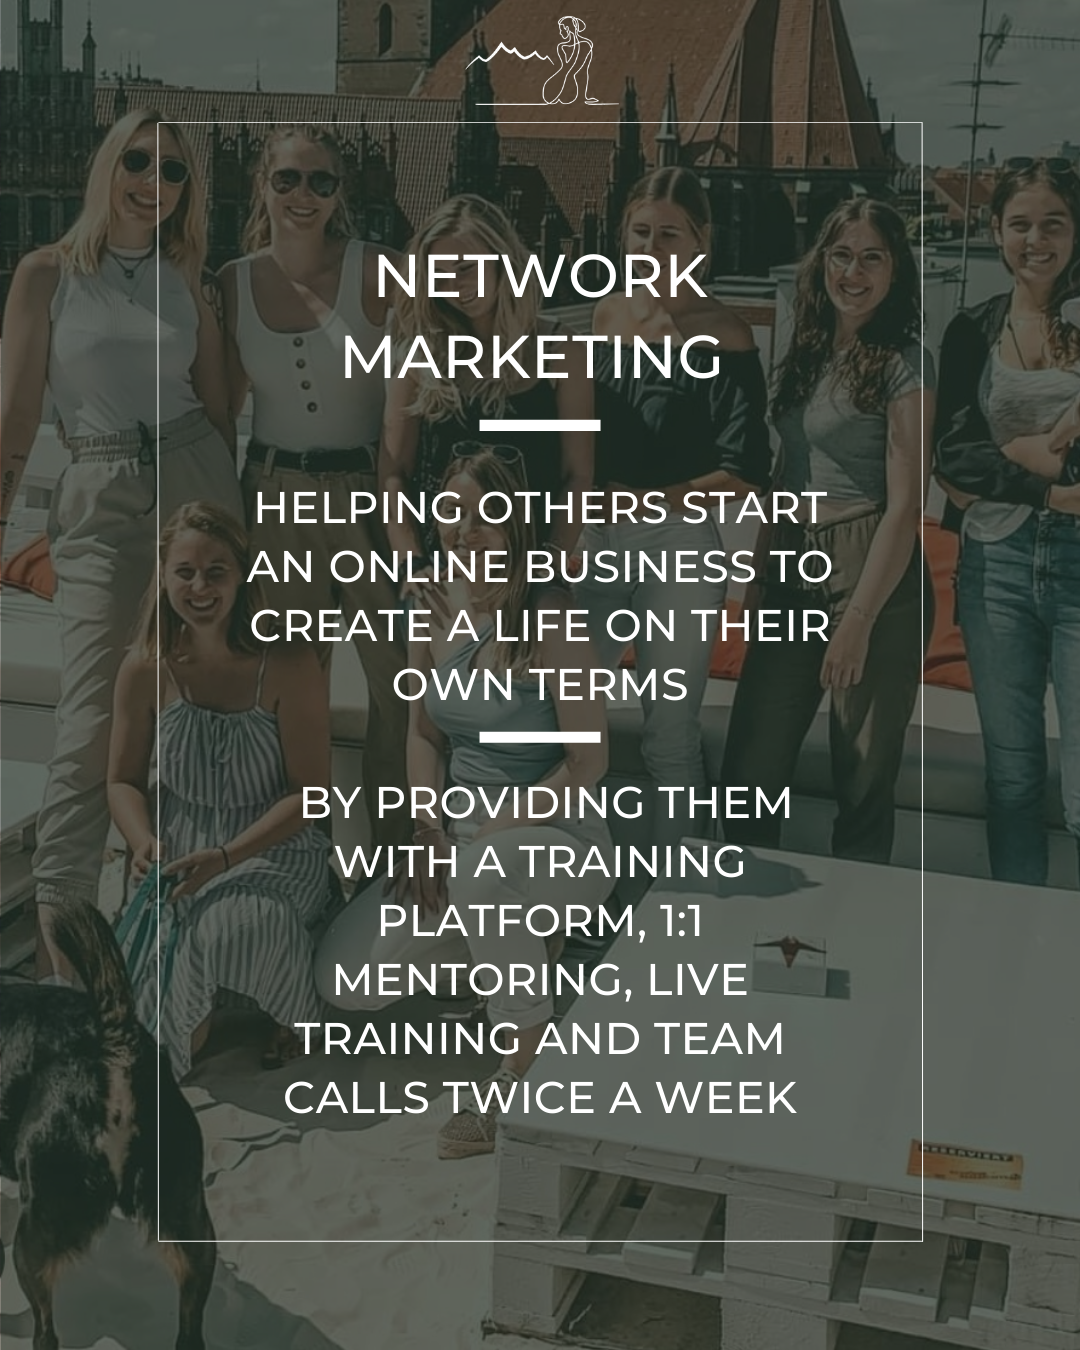 alt="what is network marketing explanation"